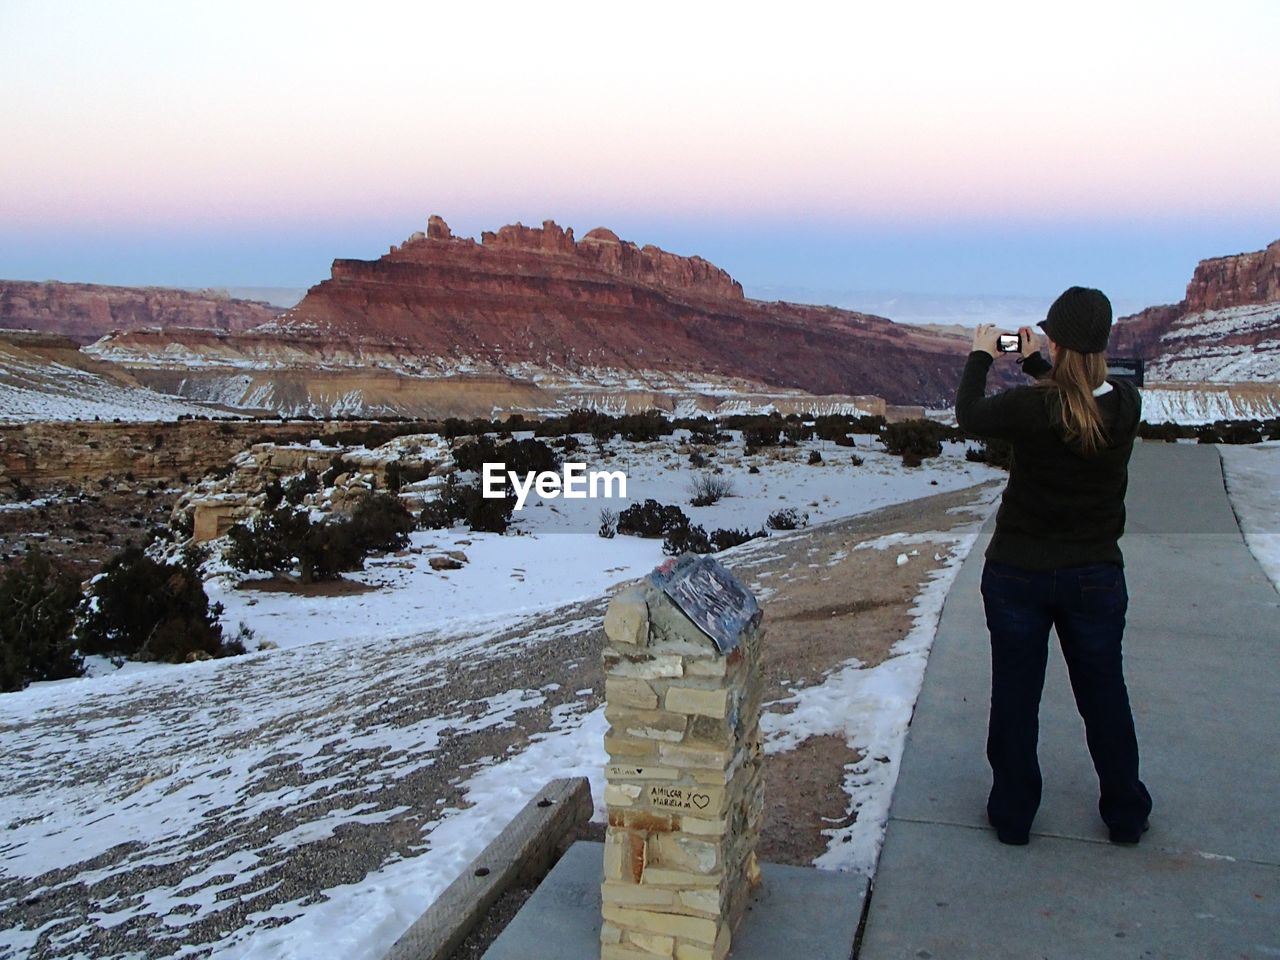 WOMAN PHOTOGRAPHING WITH SNOW COVERED LANDSCAPE